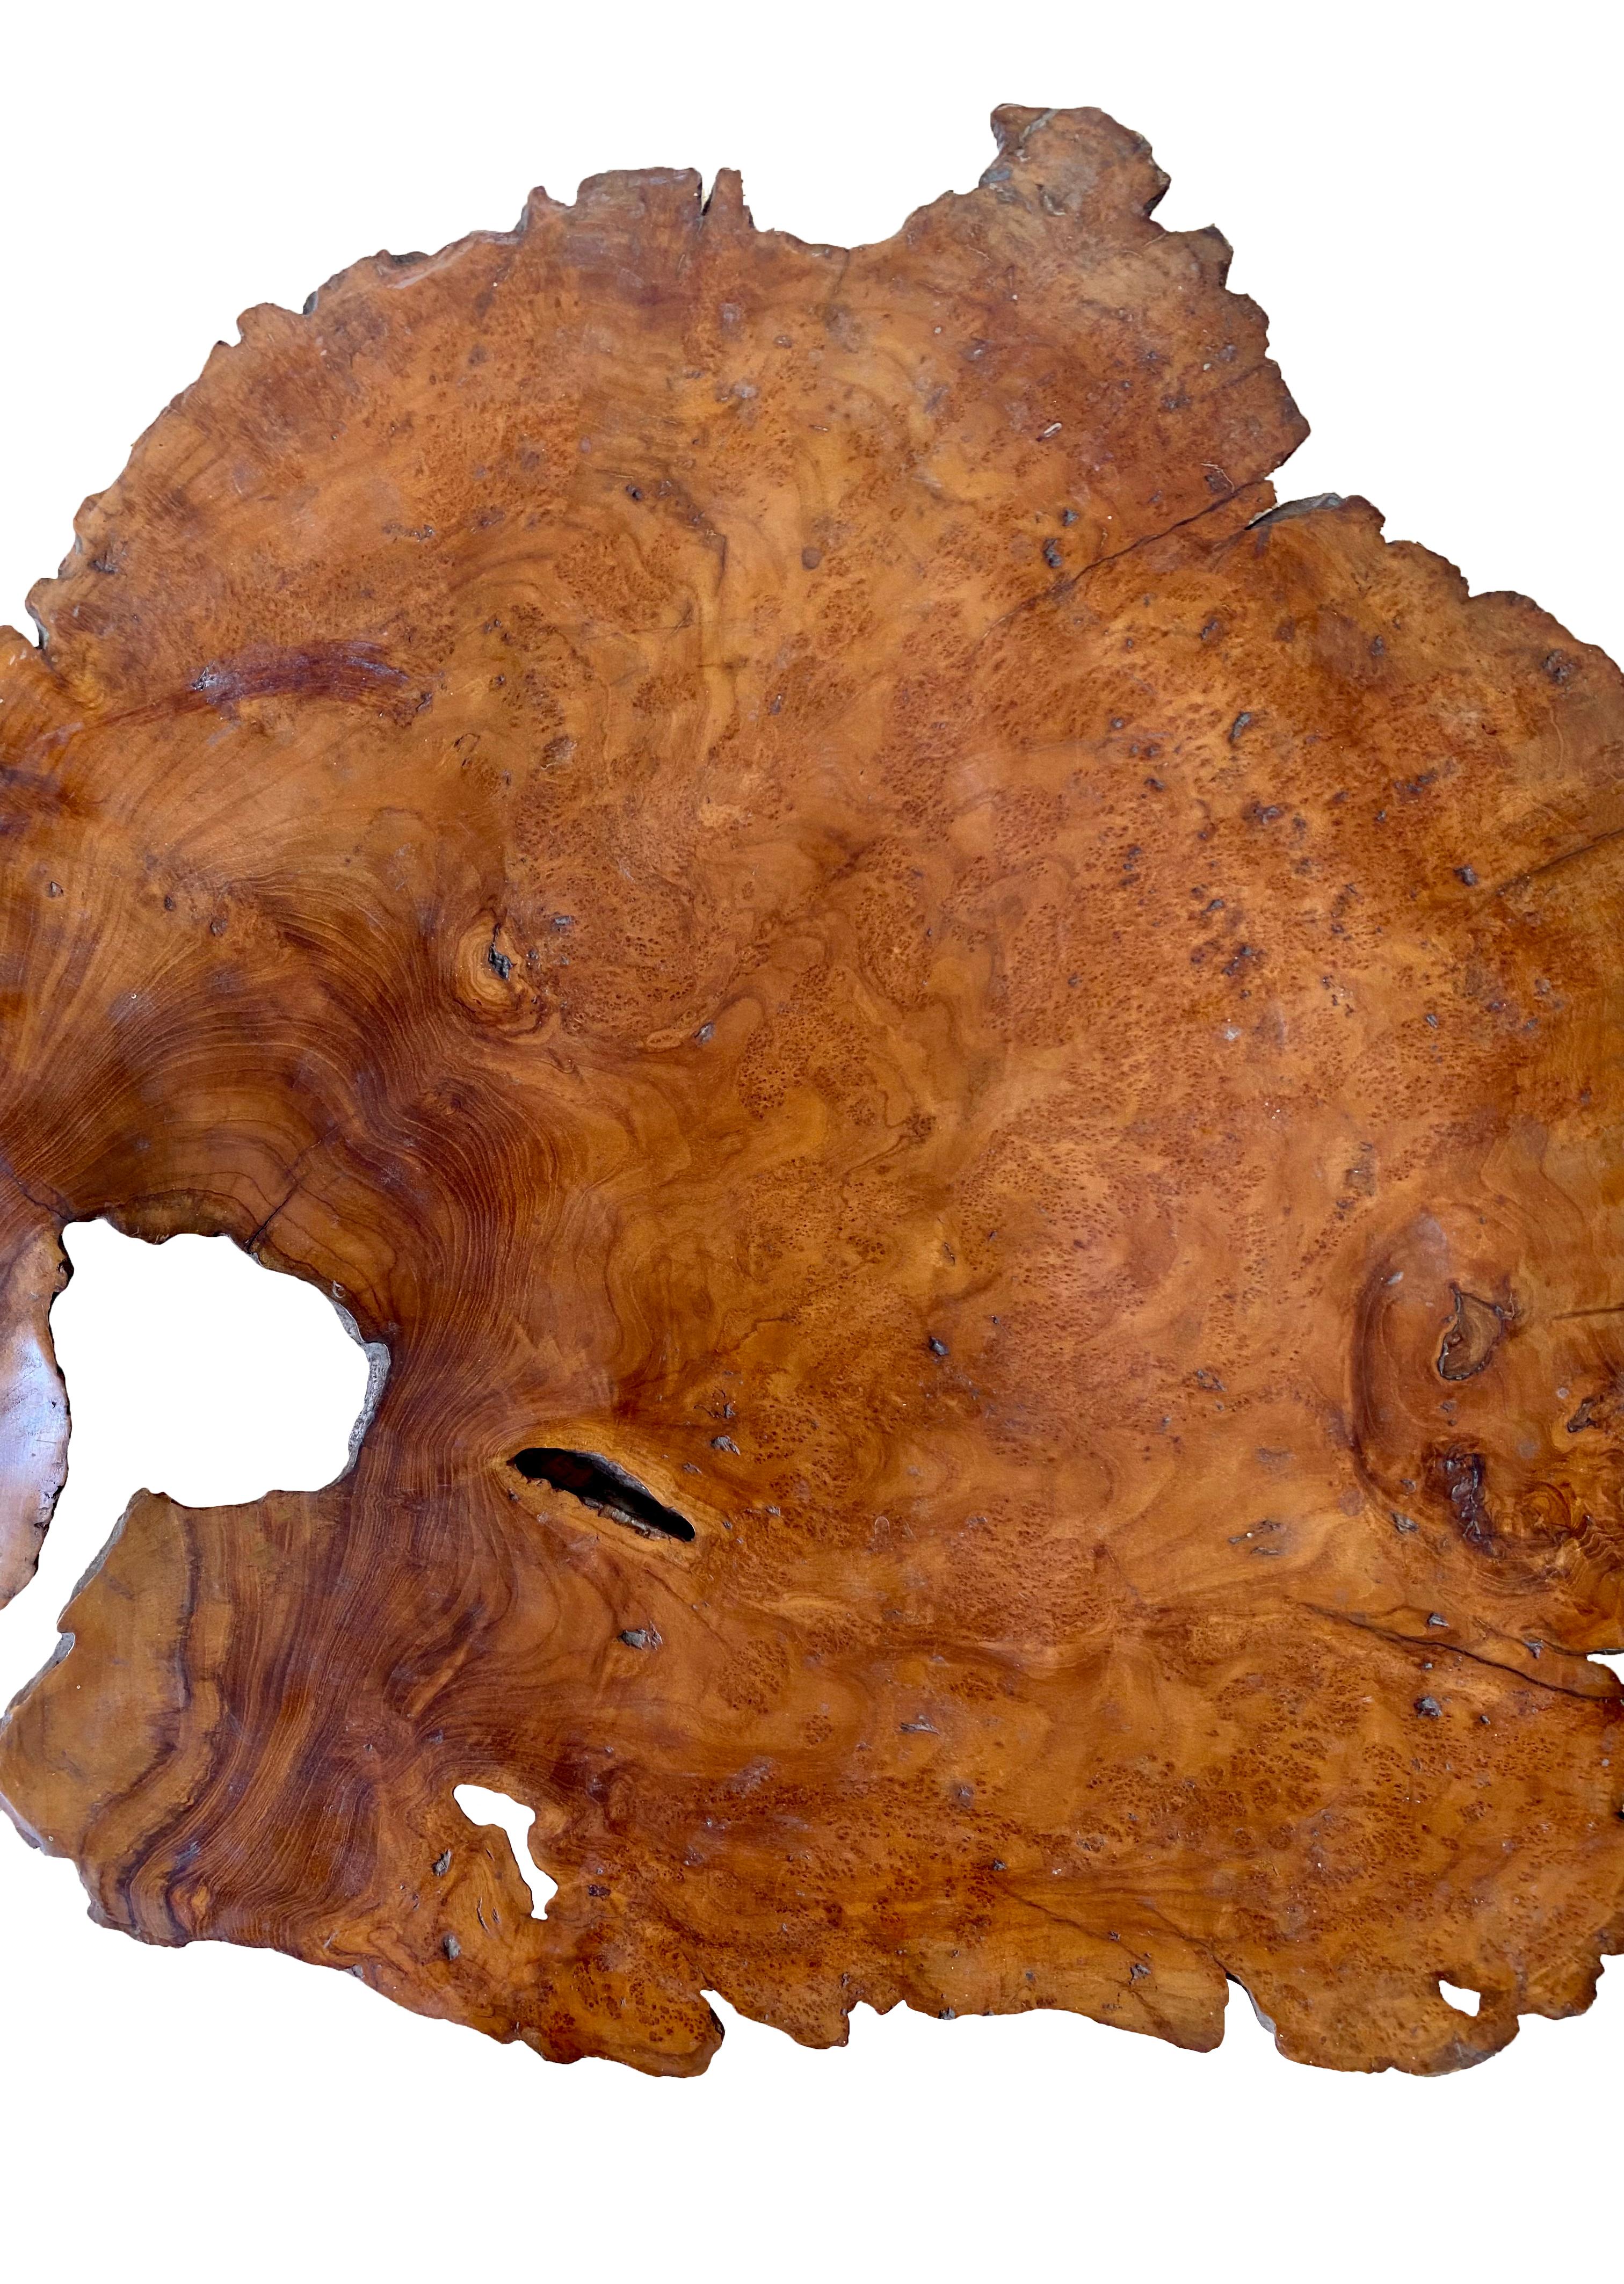 A teak burl wood bowl crafted on the island of Java, Indonesia with a shiny polished finish. The bowl was cut from a much larger slab of burl wood and maintains an incredibly organic shape that is rich in texture. 

Dimensions: Height 8cm x width